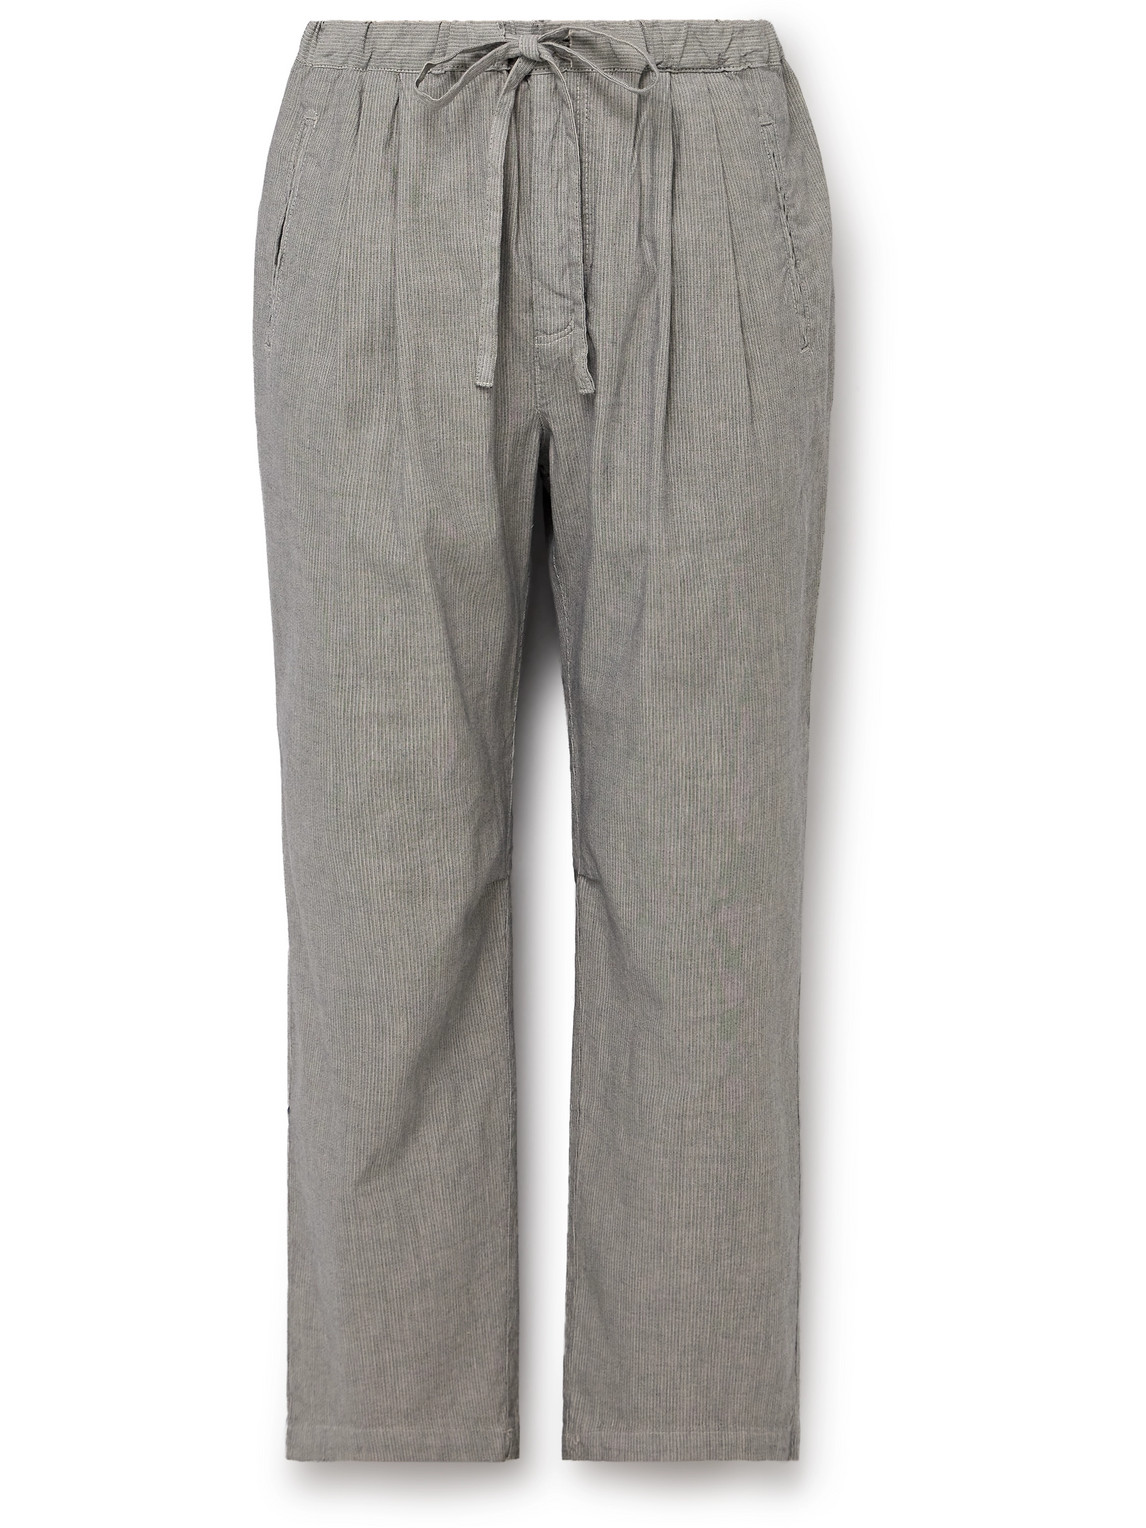 Key West Straight-Leg Striped Cotton and Linen-Blend Trousers